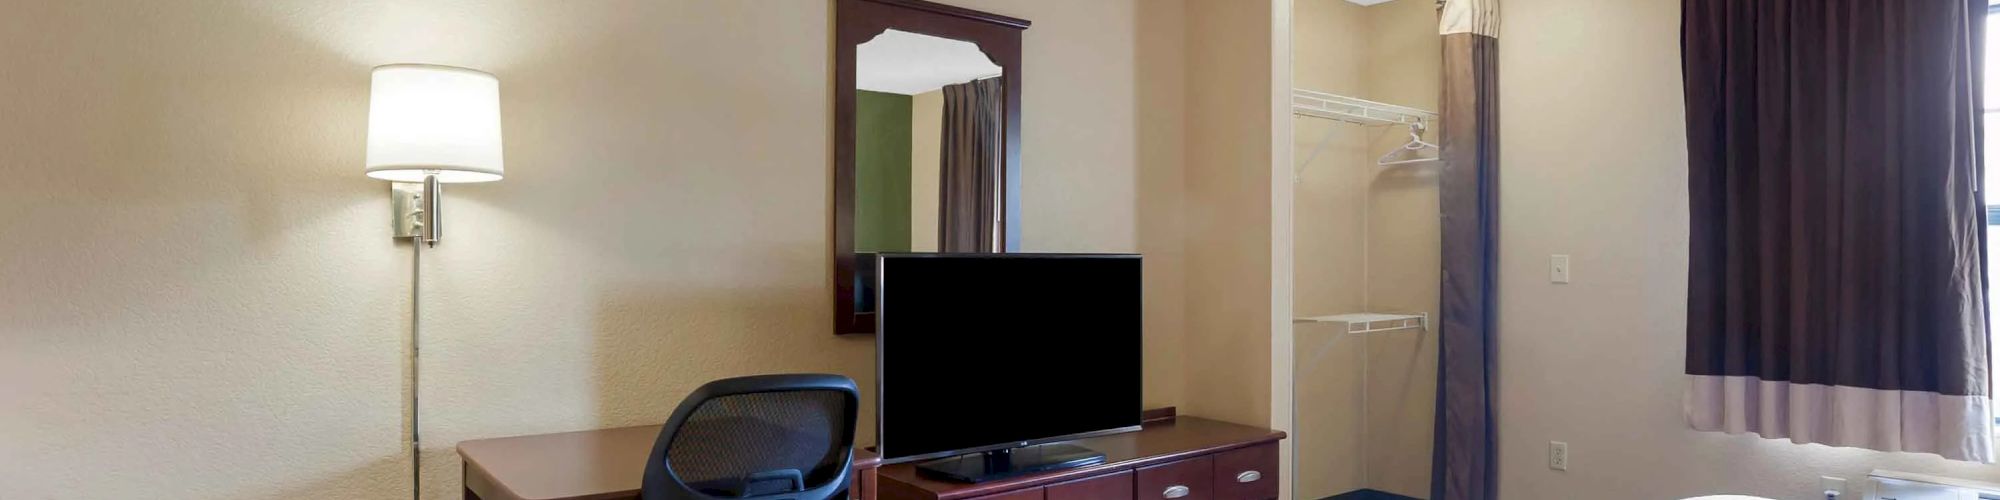 The image shows a hotel room with a bed, desk, chair, lamp, TV, dresser, mirror, and an open closet in the background.